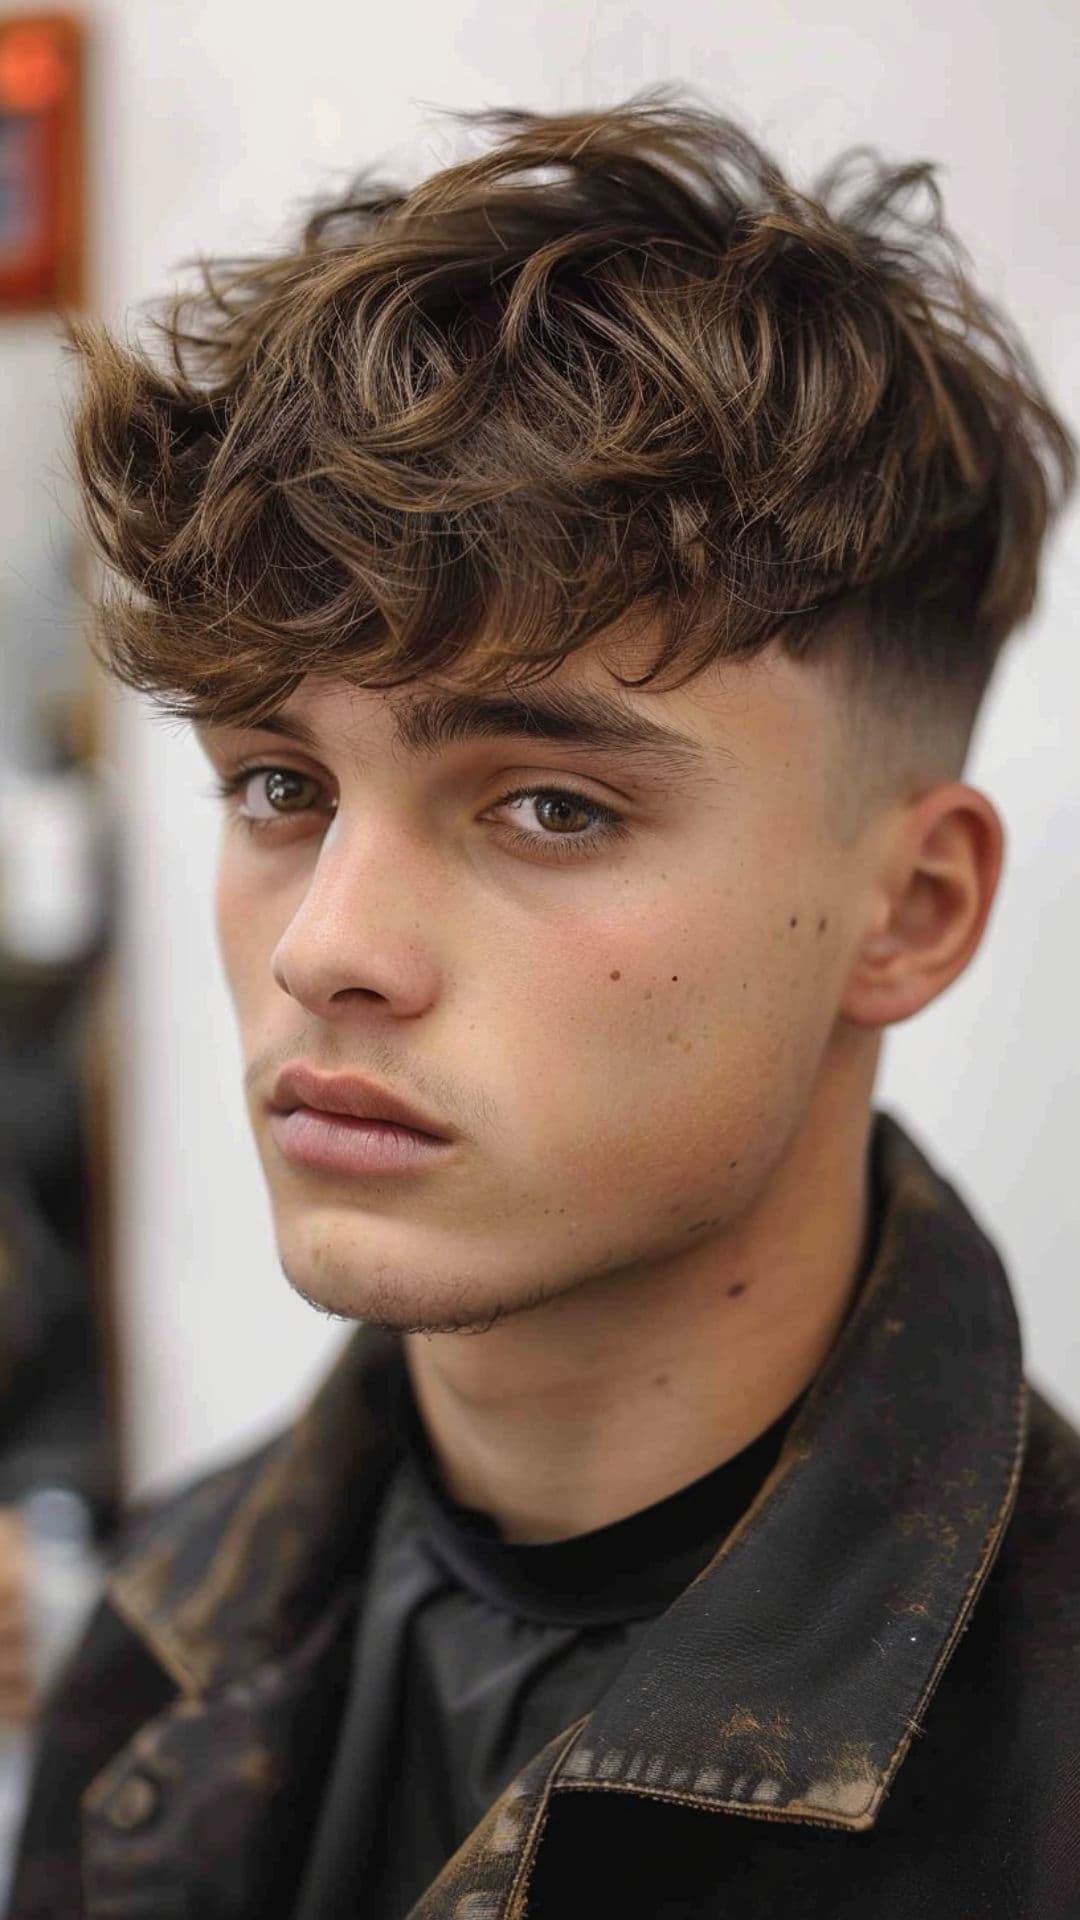 A man modelling a thick fringe hair.